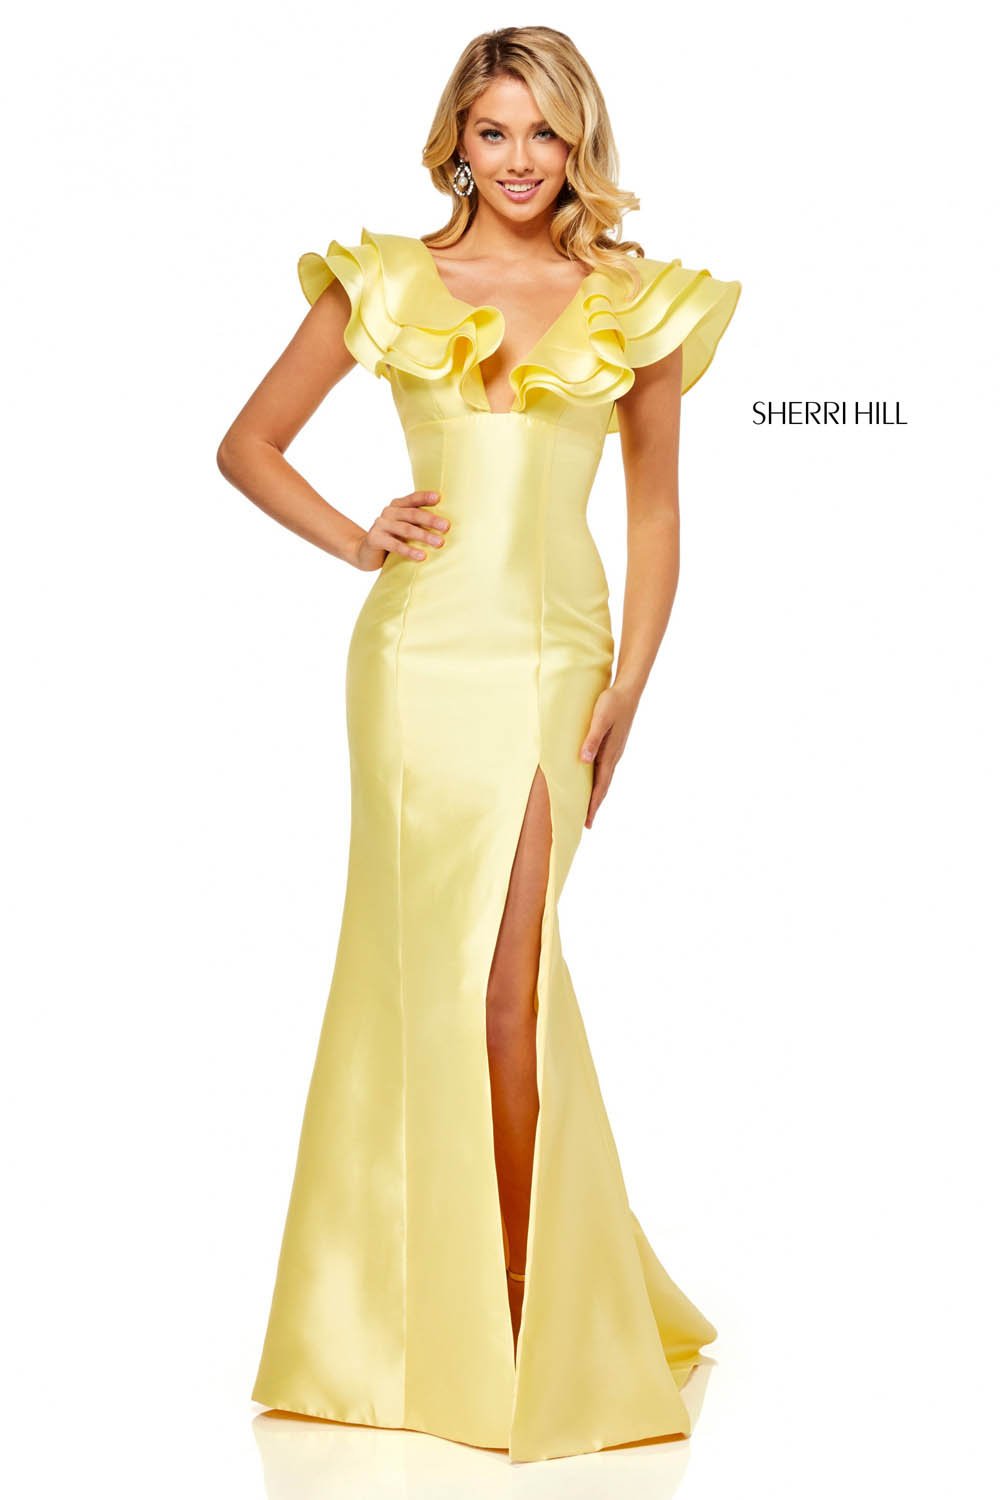 Sherri Hill 52546 dress images in these colors: Turquoise, Orange, Yellow, Light Blue, Hot Pink, Black, Lilac, Red, Emerald.